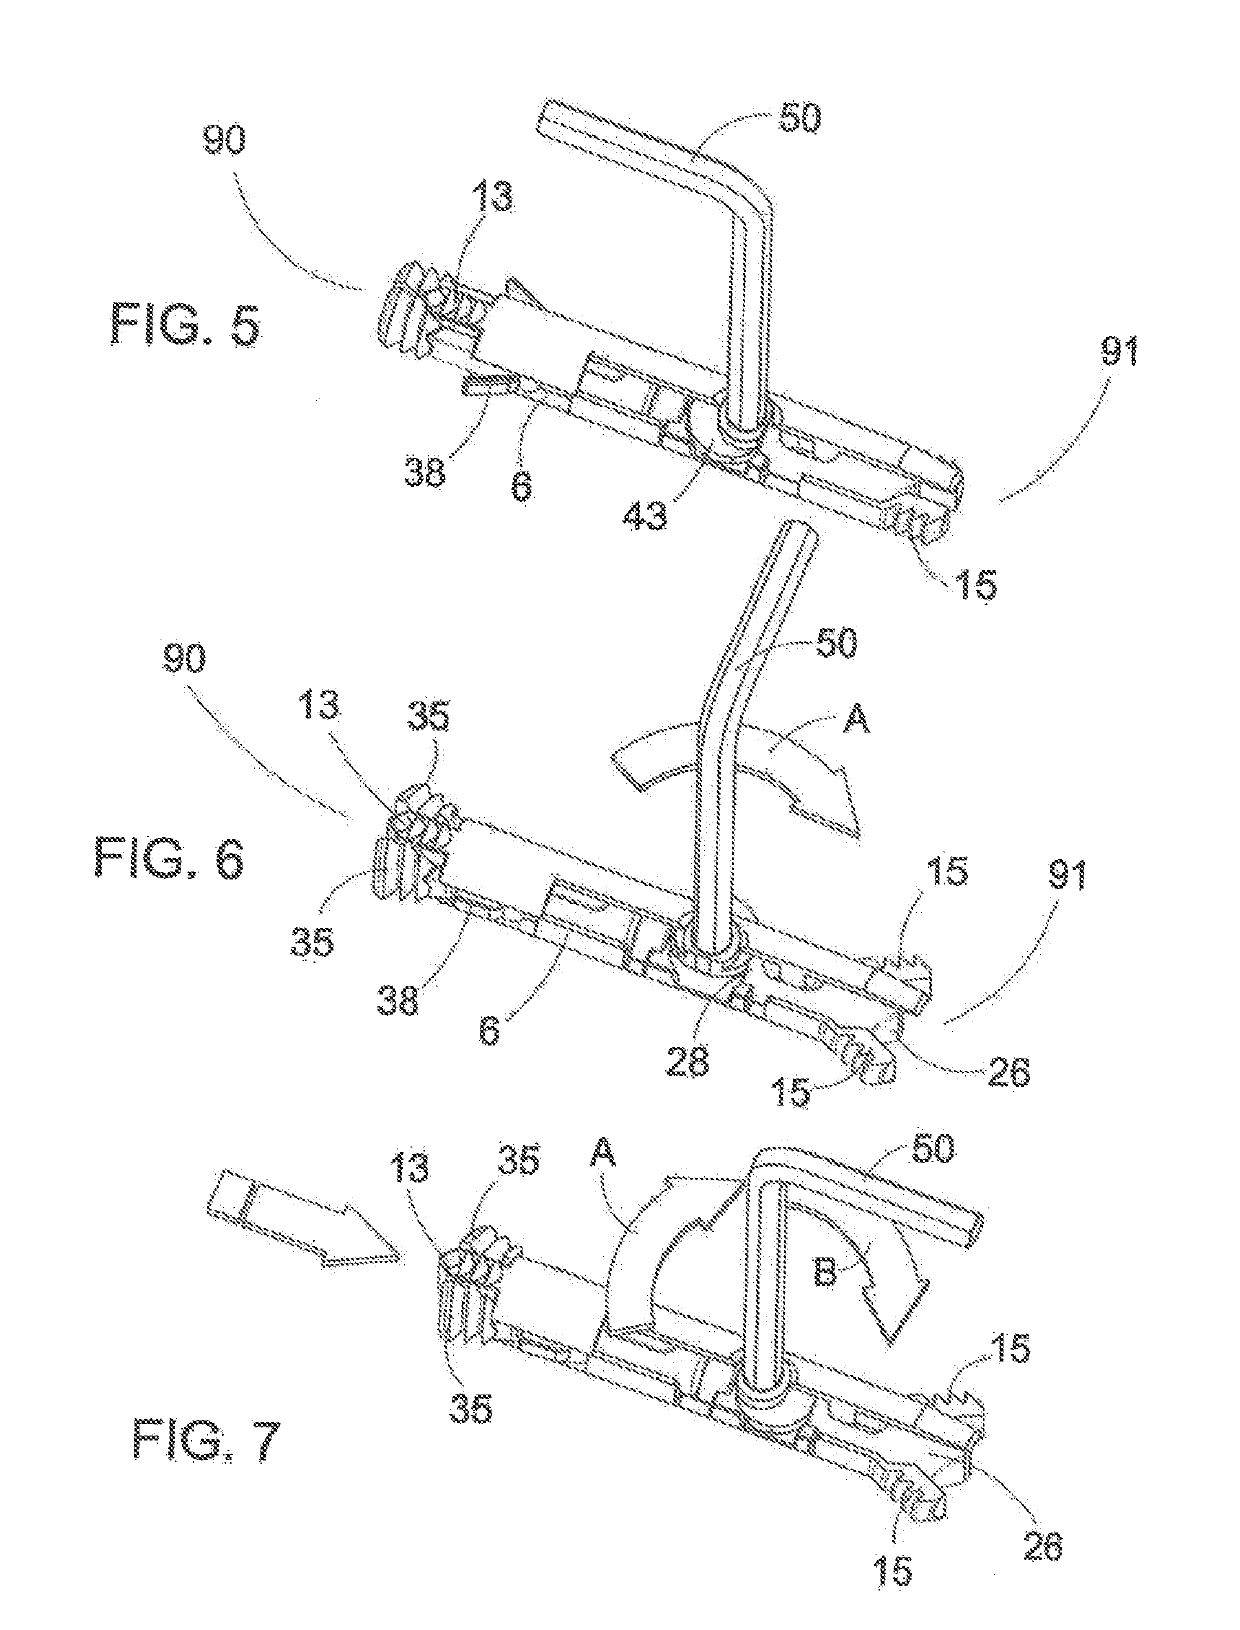 Device for joining of parts of furniture and furnishing accessories